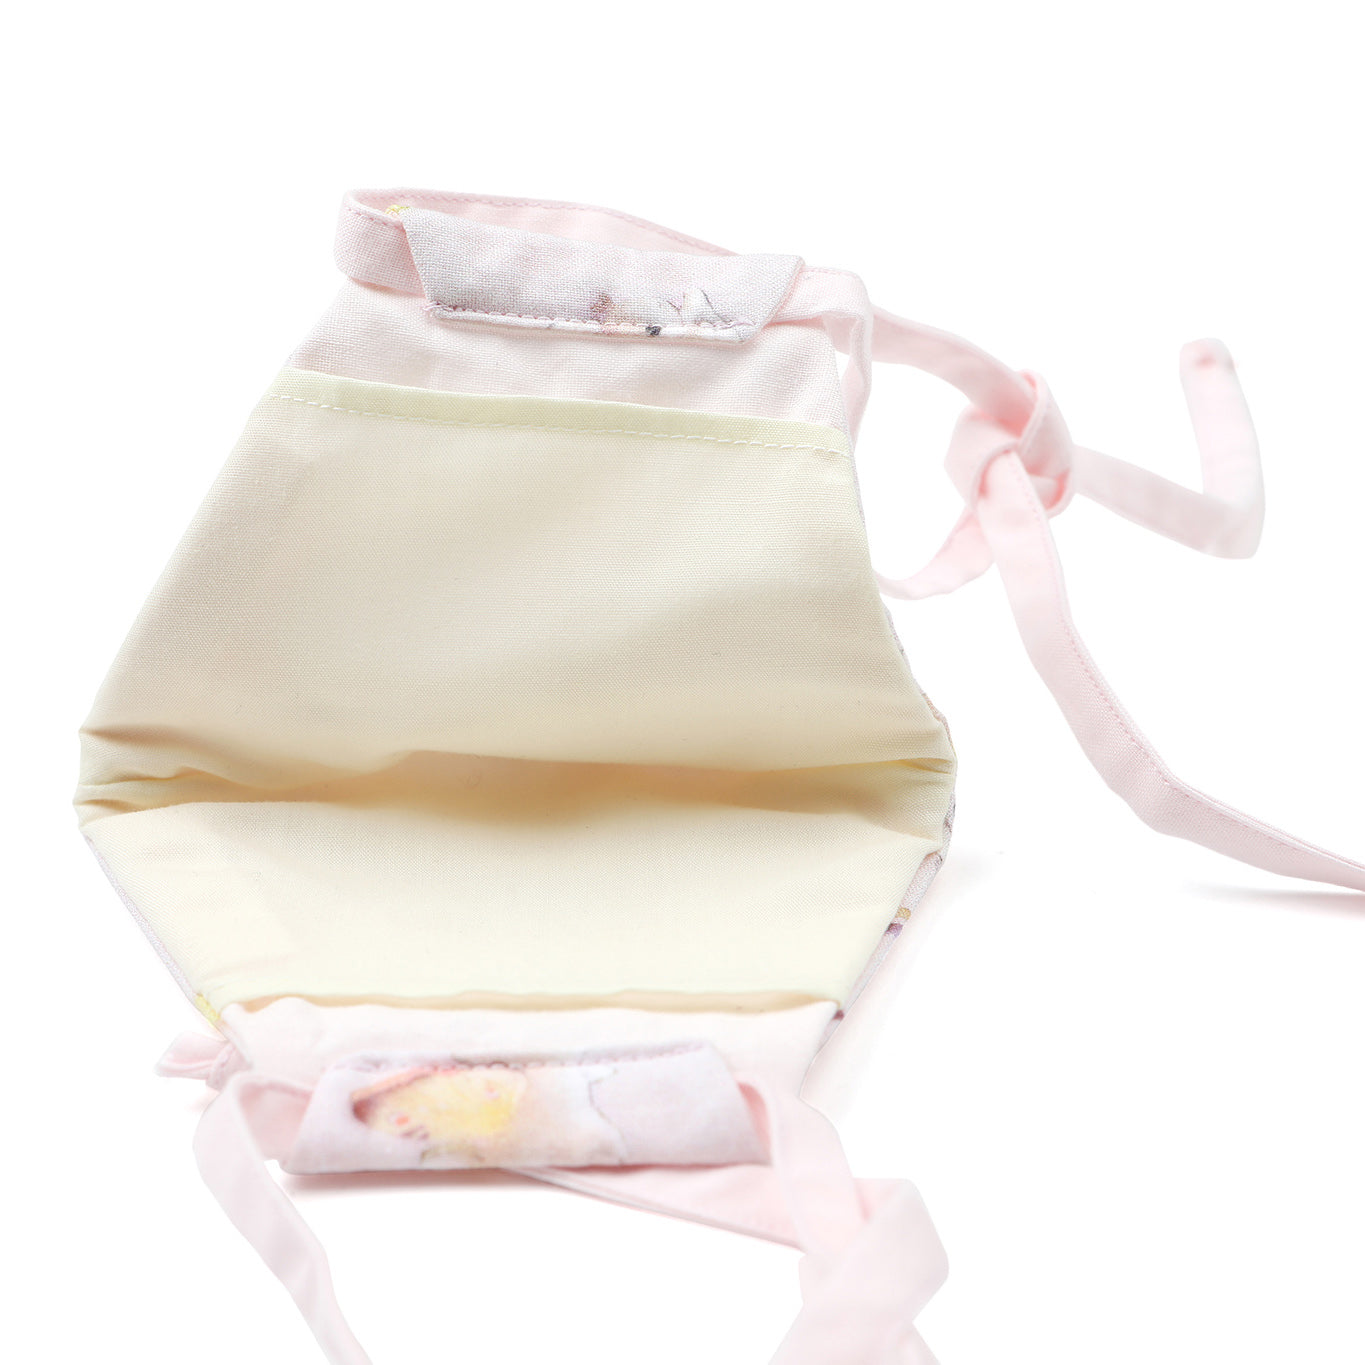 Inside view of Pastel pink Bunnerfly mask on white background.